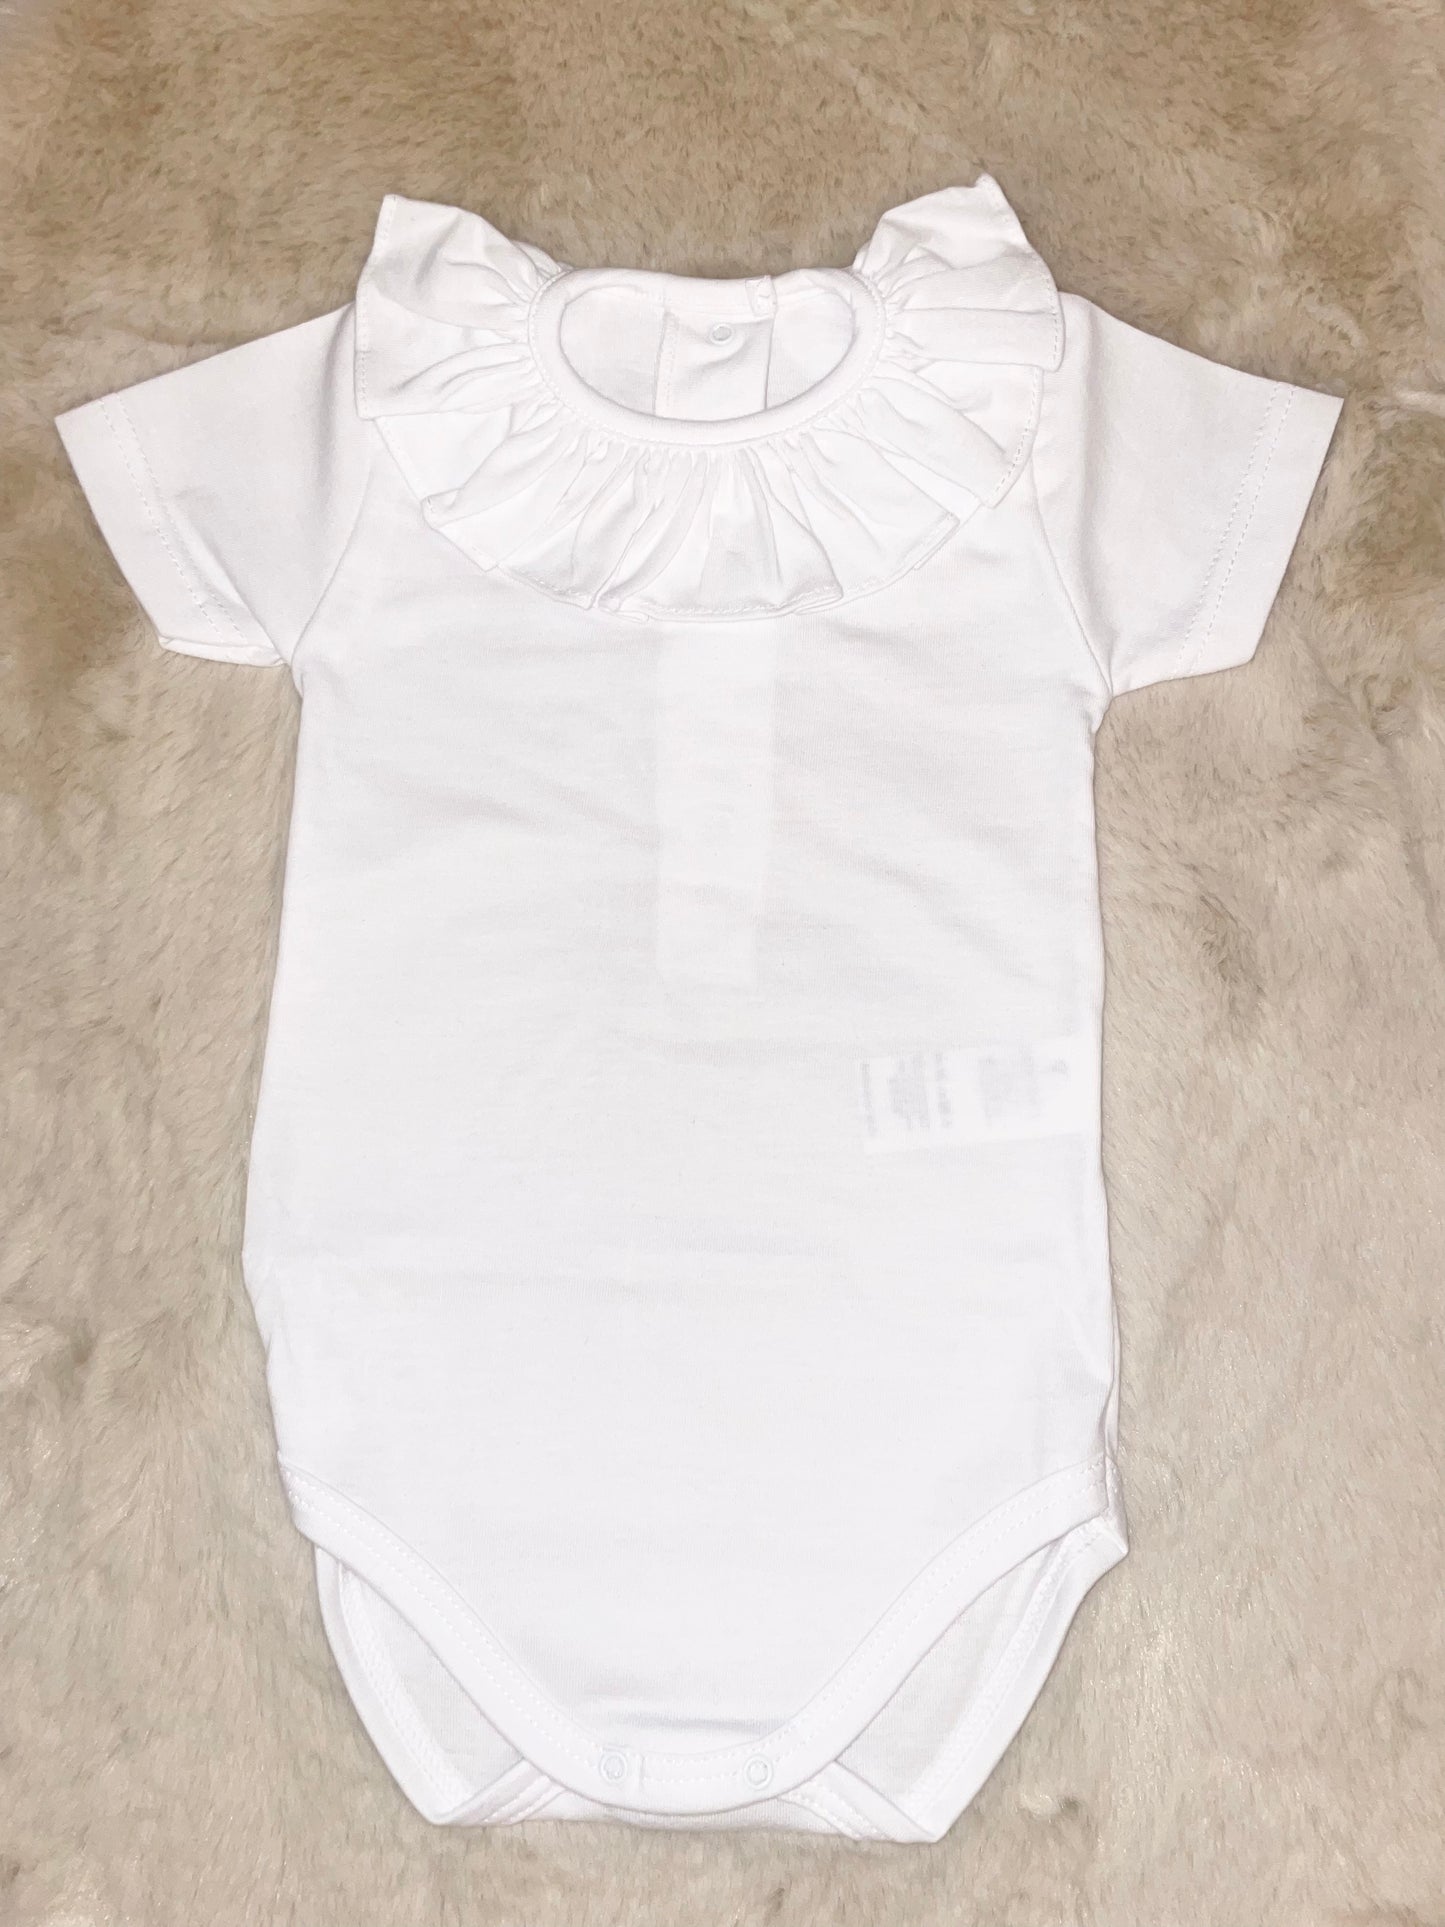 Calamaro Baby White Short Sleeved T Shirt Vest With Frill Collar